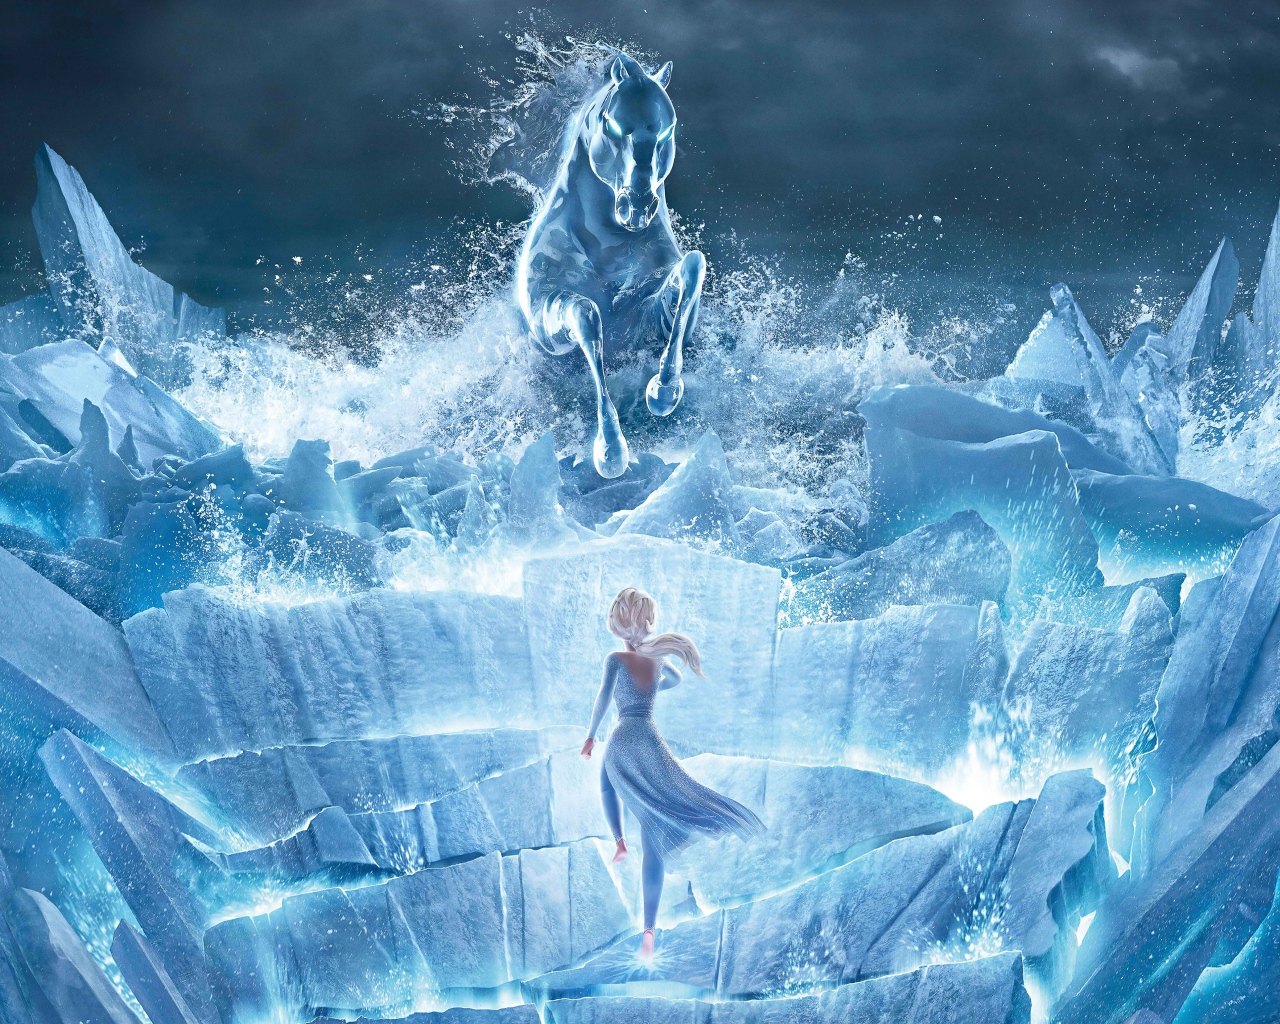 Elsa on an ice cliff with a horse